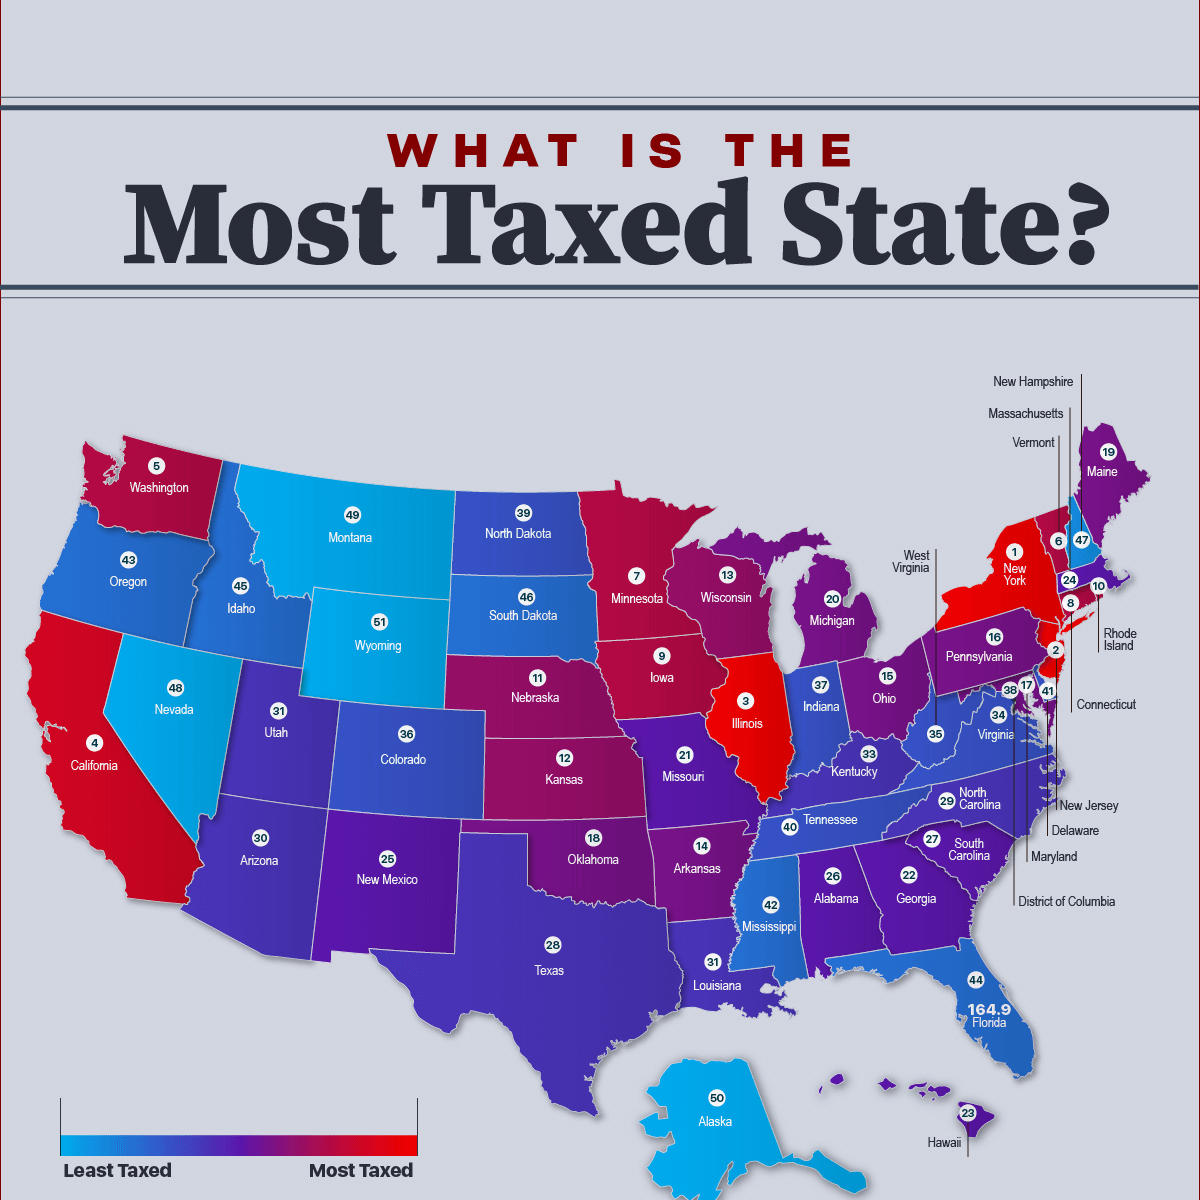 What is the most taxed state?